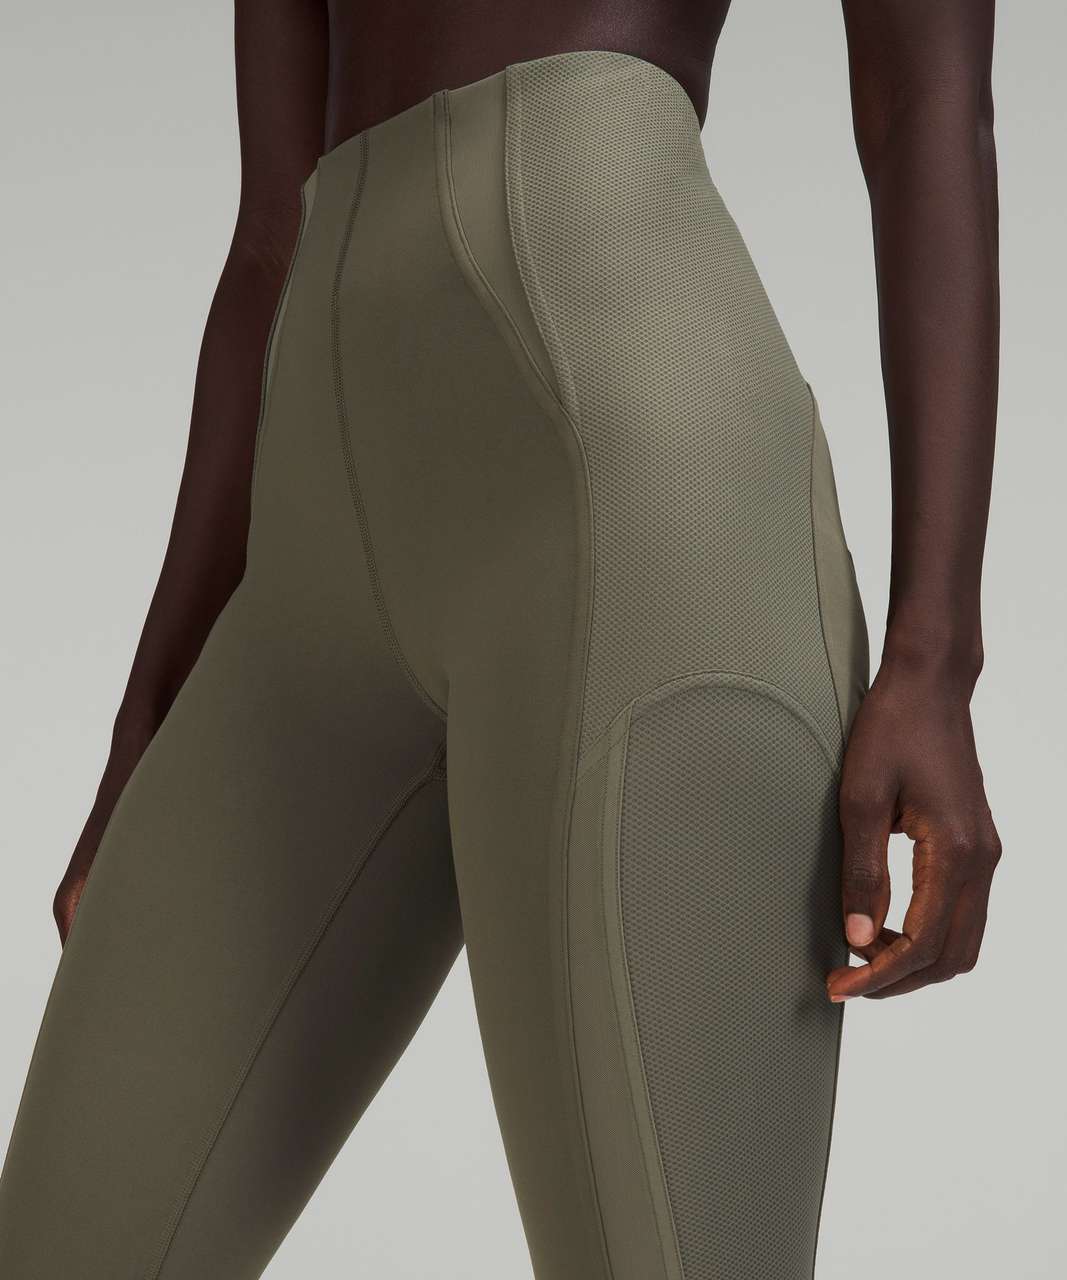 Lululemon + Everlux™ and Mesh High-Rise Tight 25″